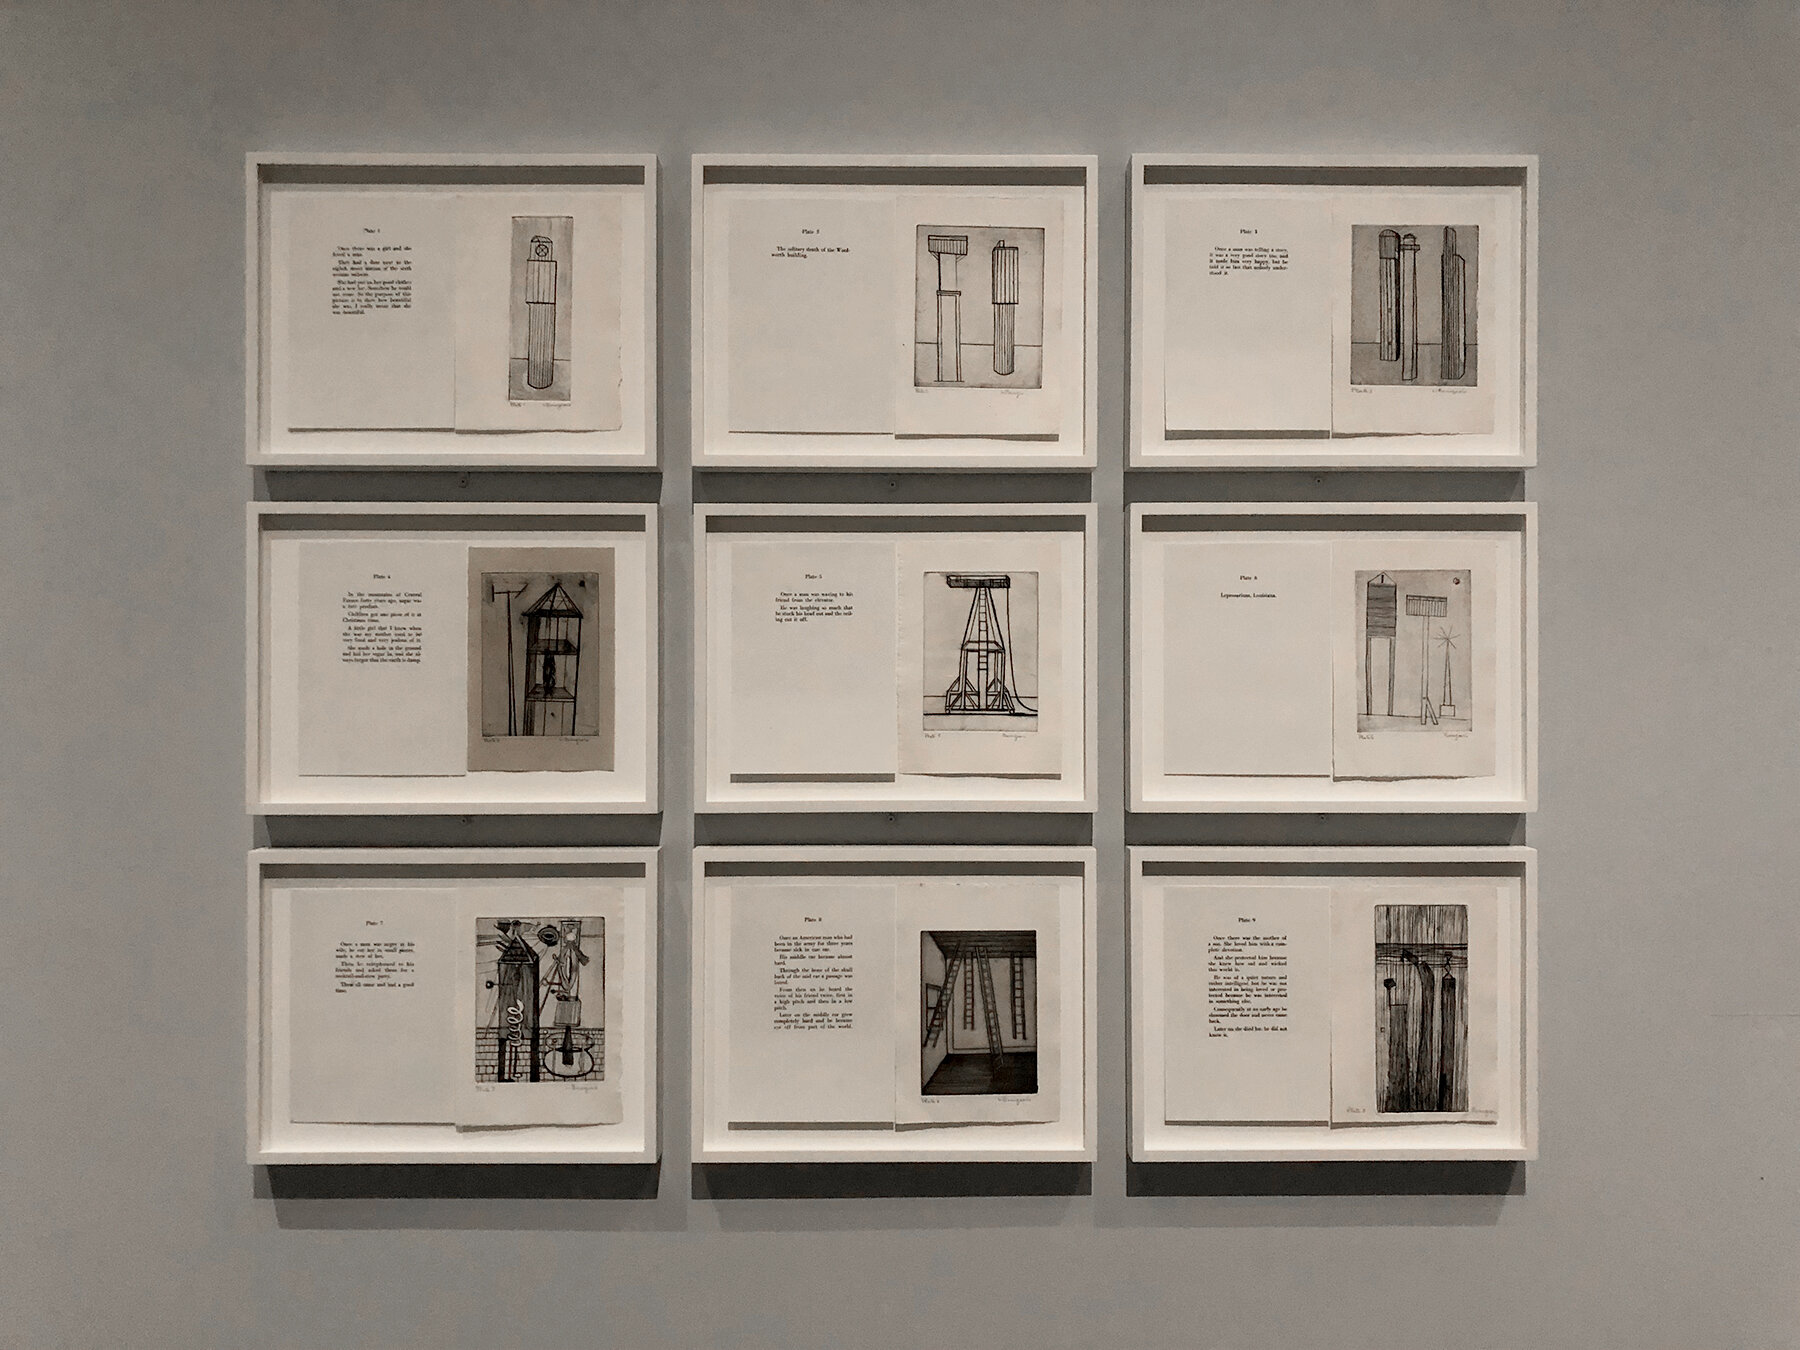 Louise Bourgeois' Early Paintings at The Met